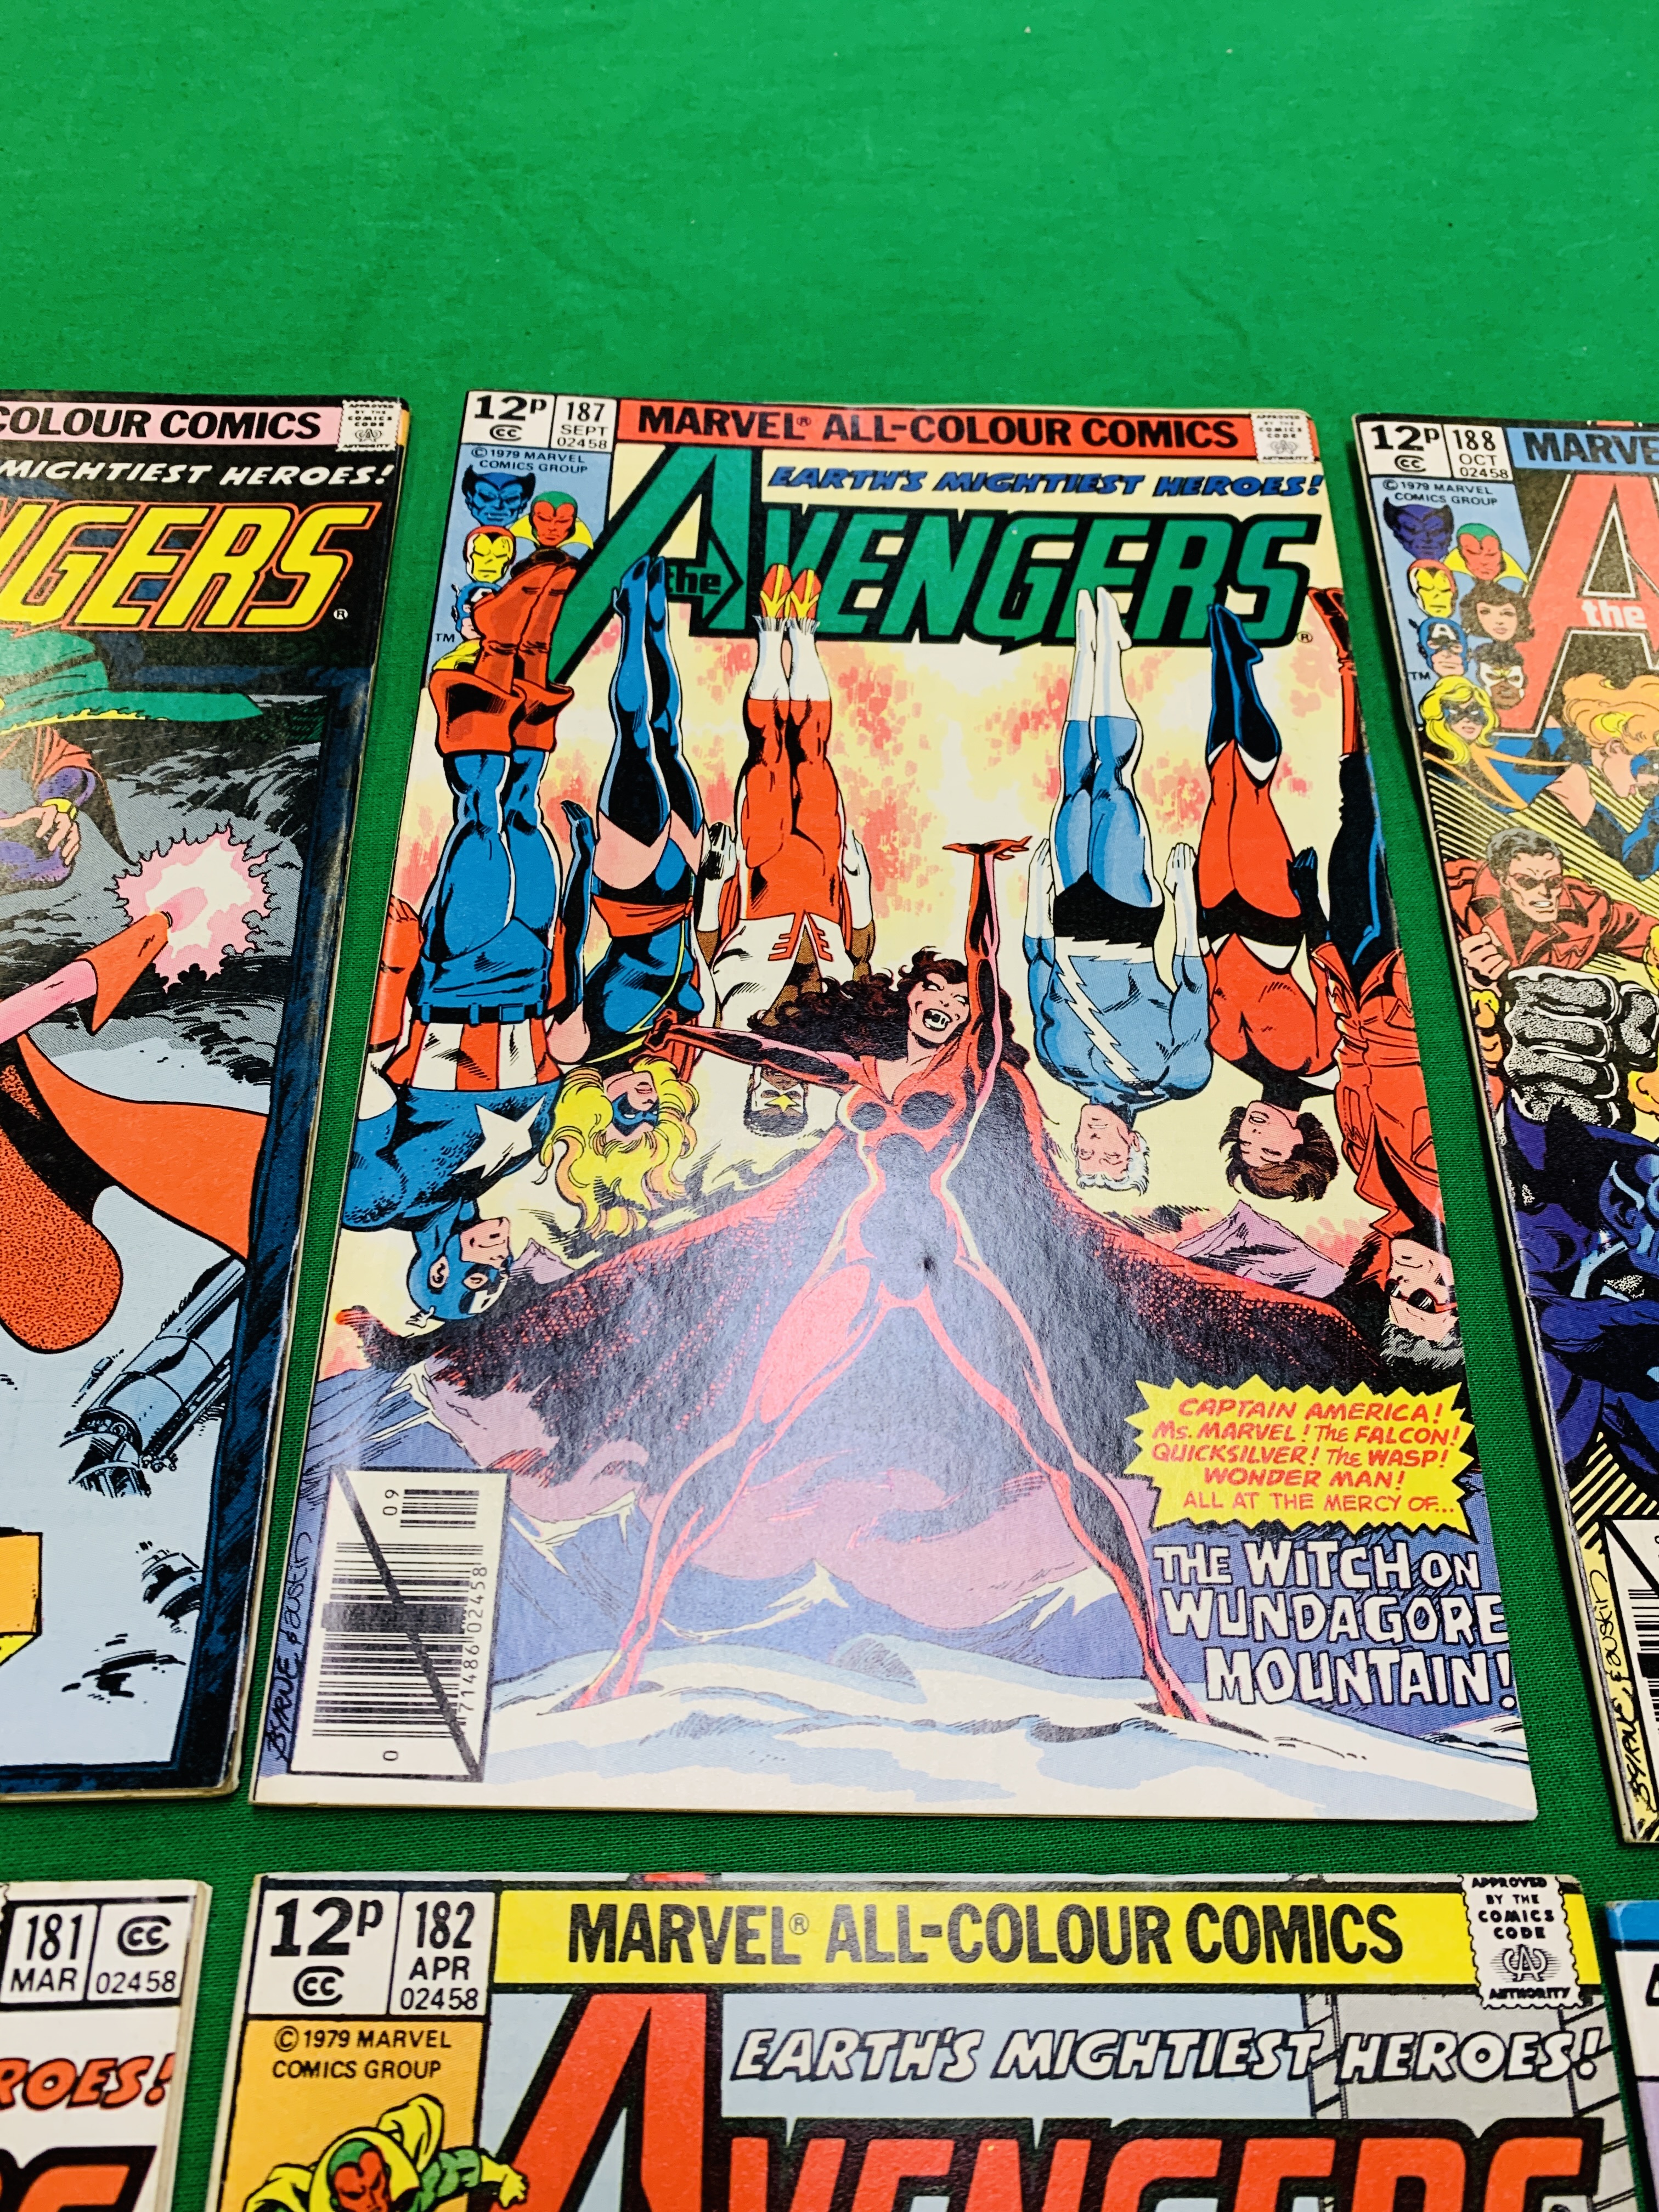 MARVEL COMICS THE AVENGERS NO. 101 - 299, MISSING ISSUES 103 AND 110. - Image 66 of 130